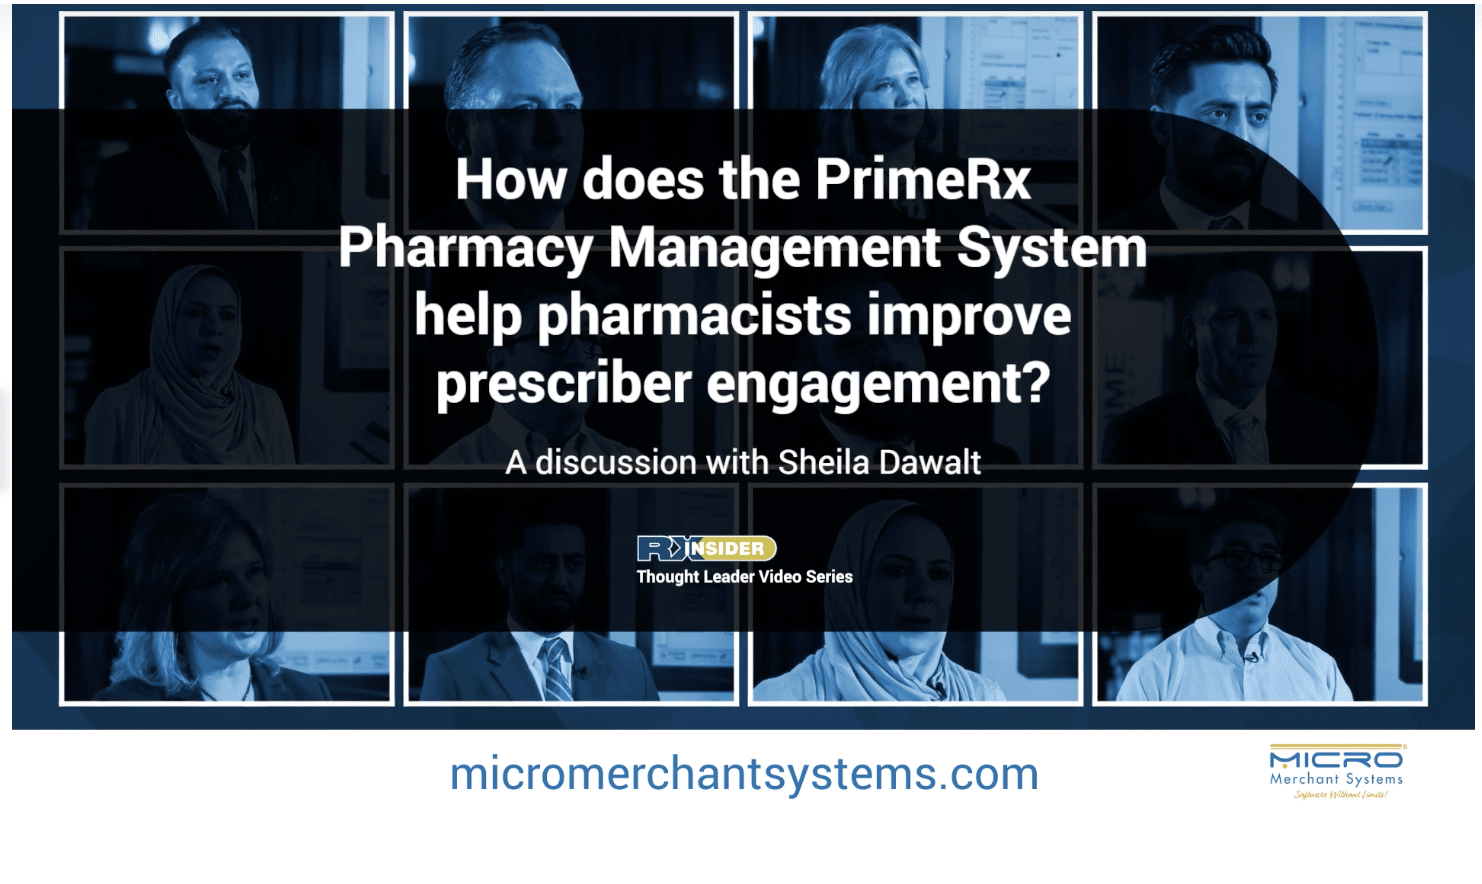 how does the primerx pharmacy management system help pharmacists improve prescriber engagement - cover